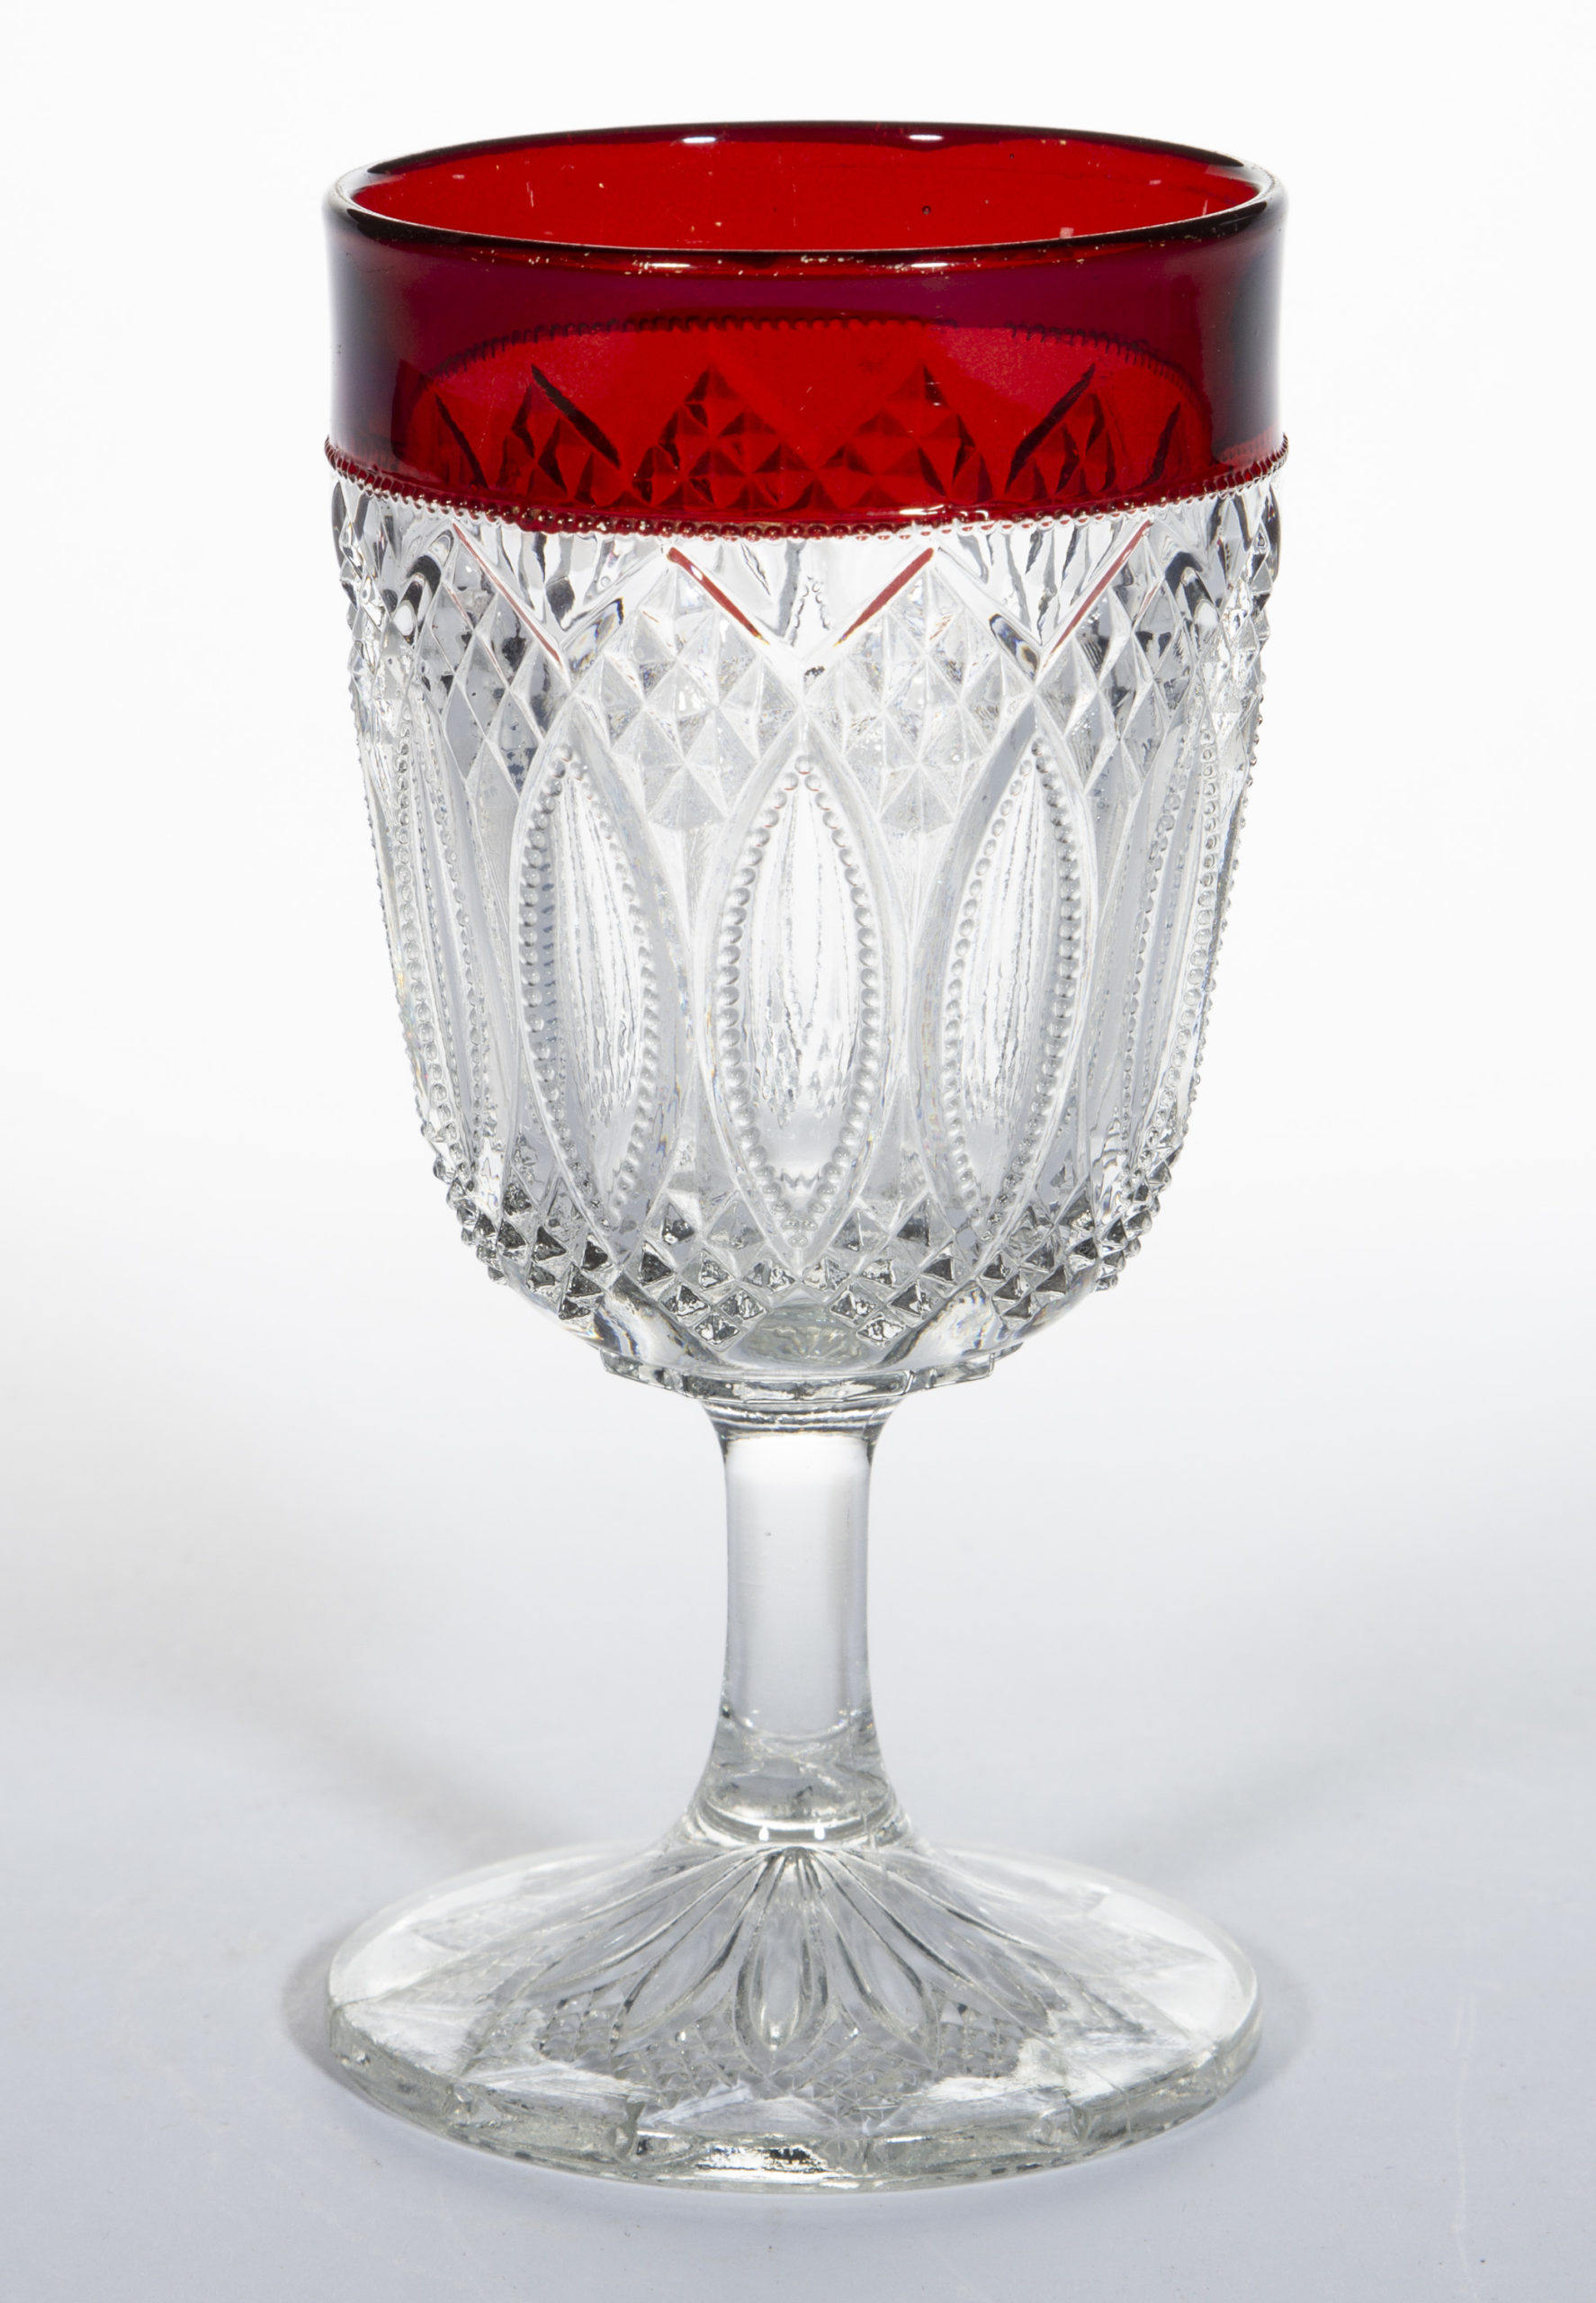 LOUISIANA (OMN) / SHARP OVAL AND DIAMOND – RUBY-STAINED GOBLET,